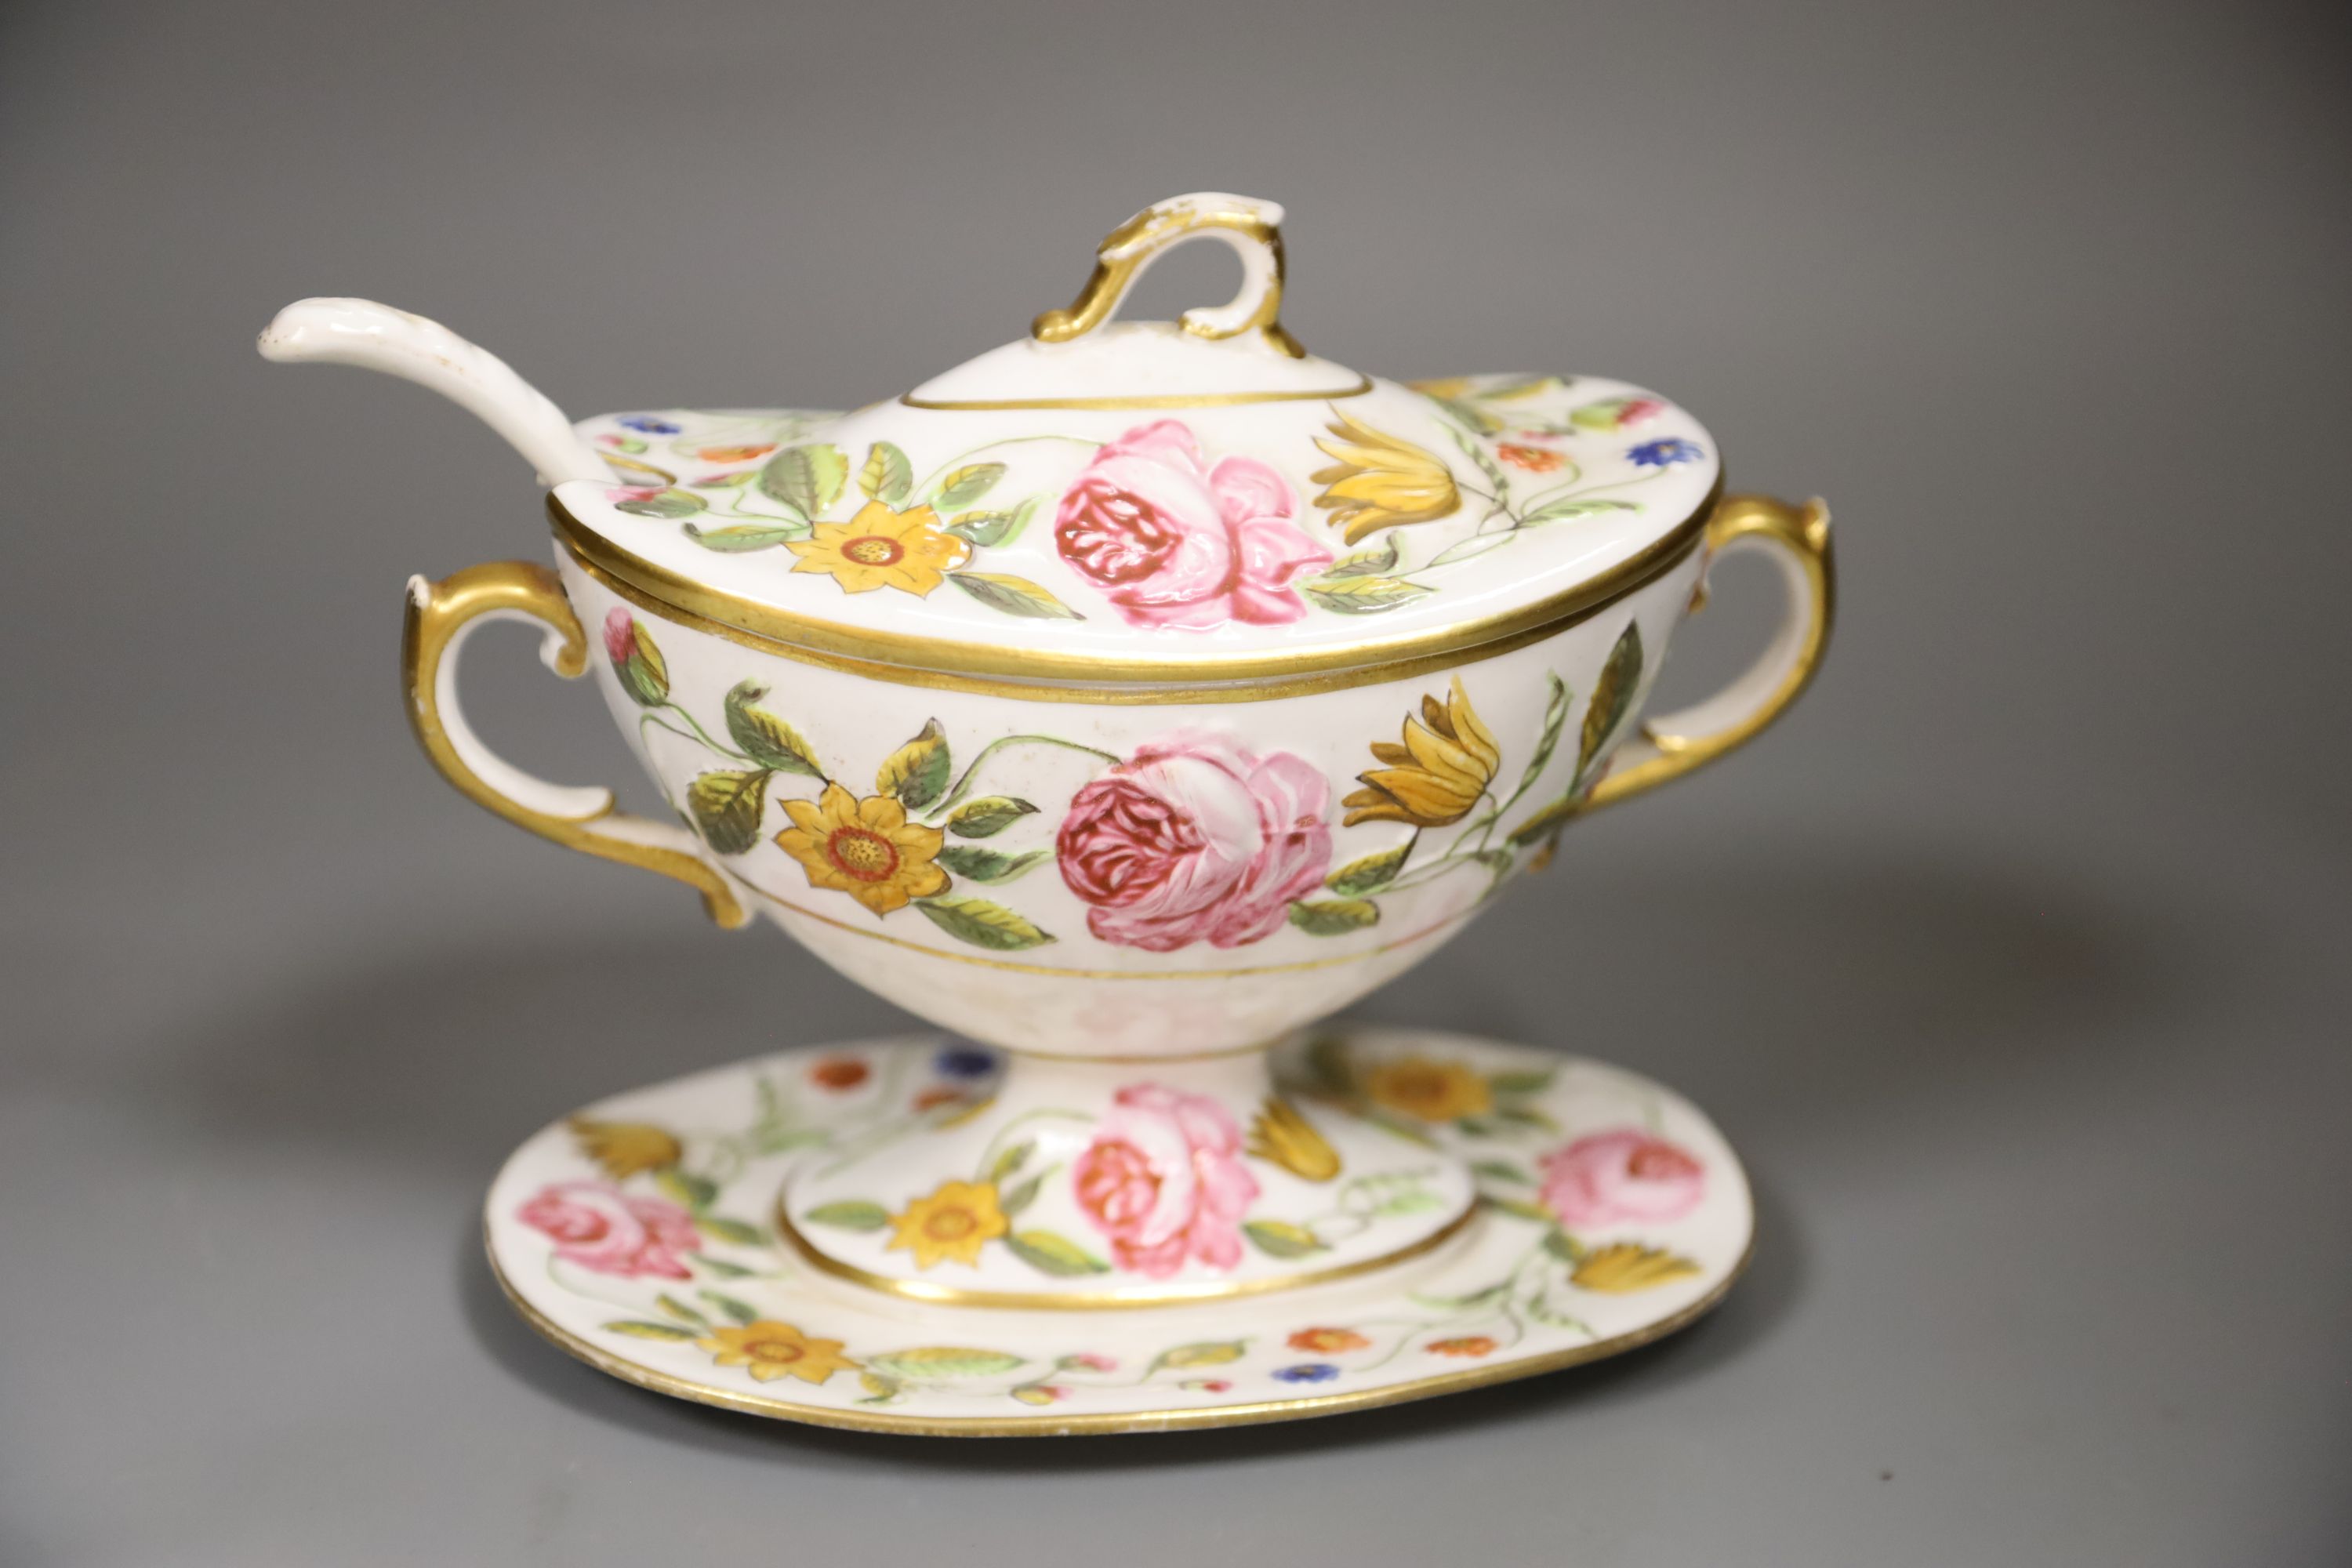 An English porcelain floral moulded tureen cover and ladle, probably Coalport, height 15cm